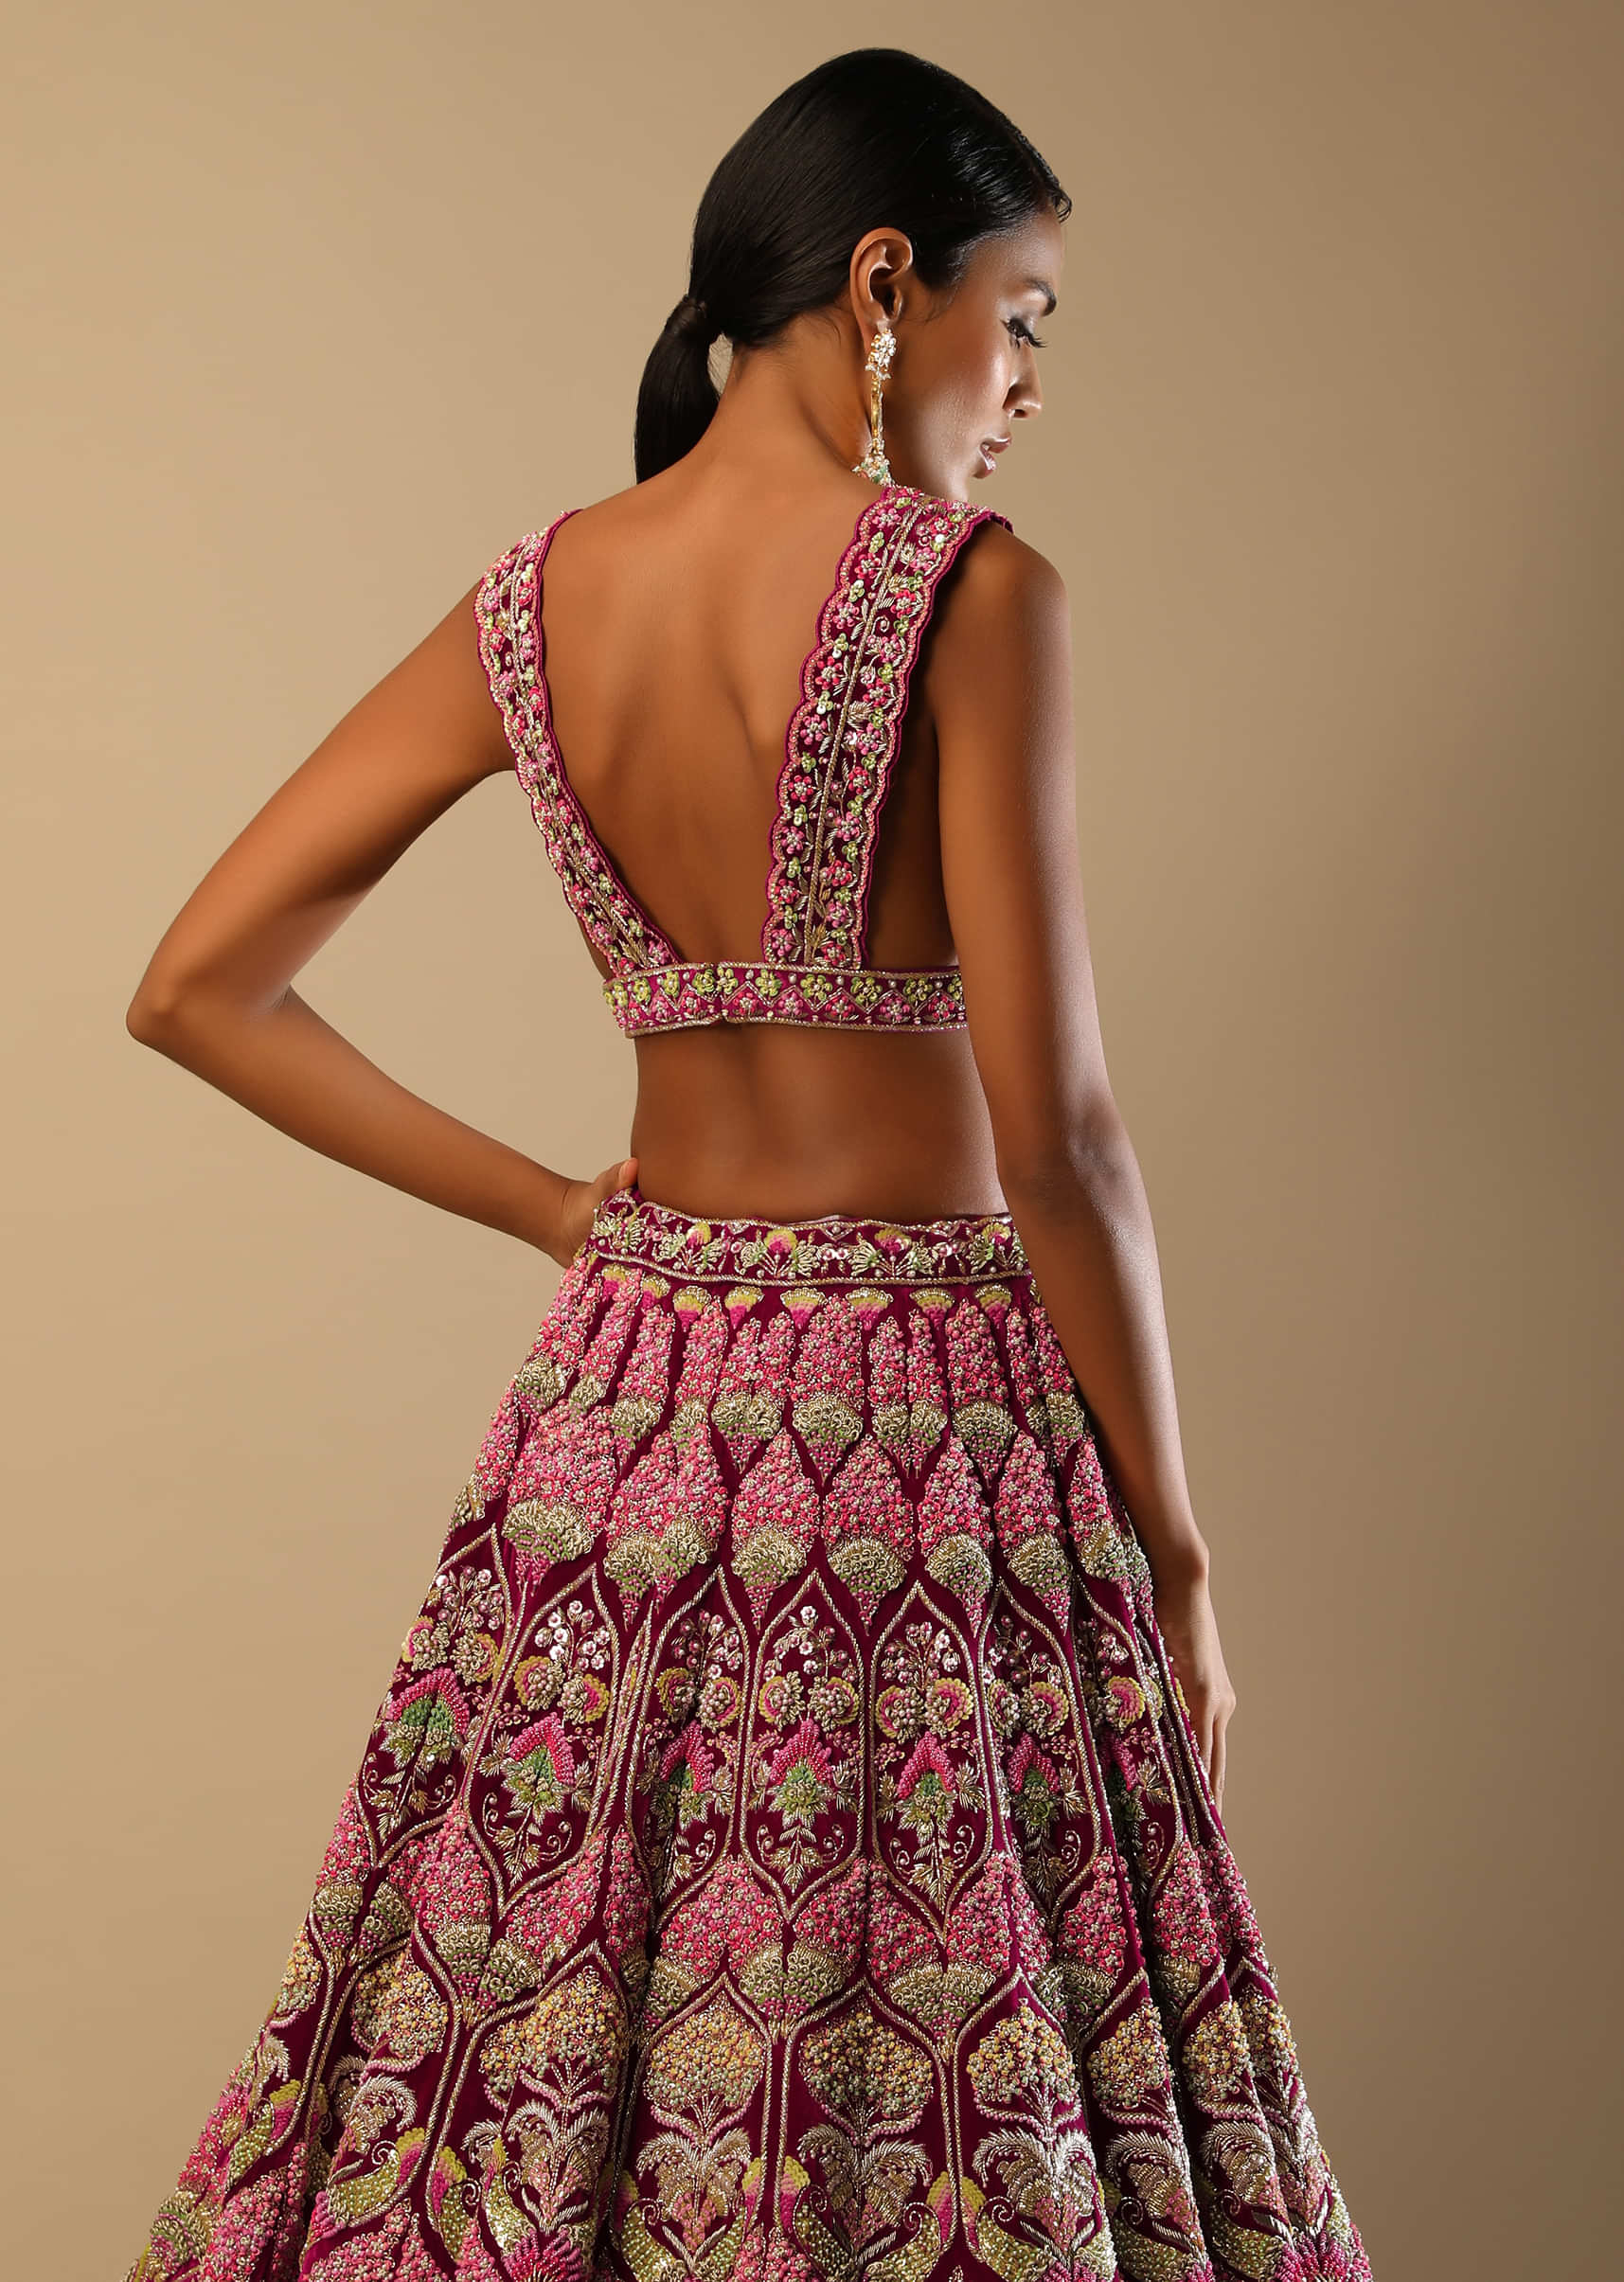 Sangria Lehenga Choli In Velvet With Multi Colored Hand Embroidery In Intricate Moroccan And Floral Motifs 